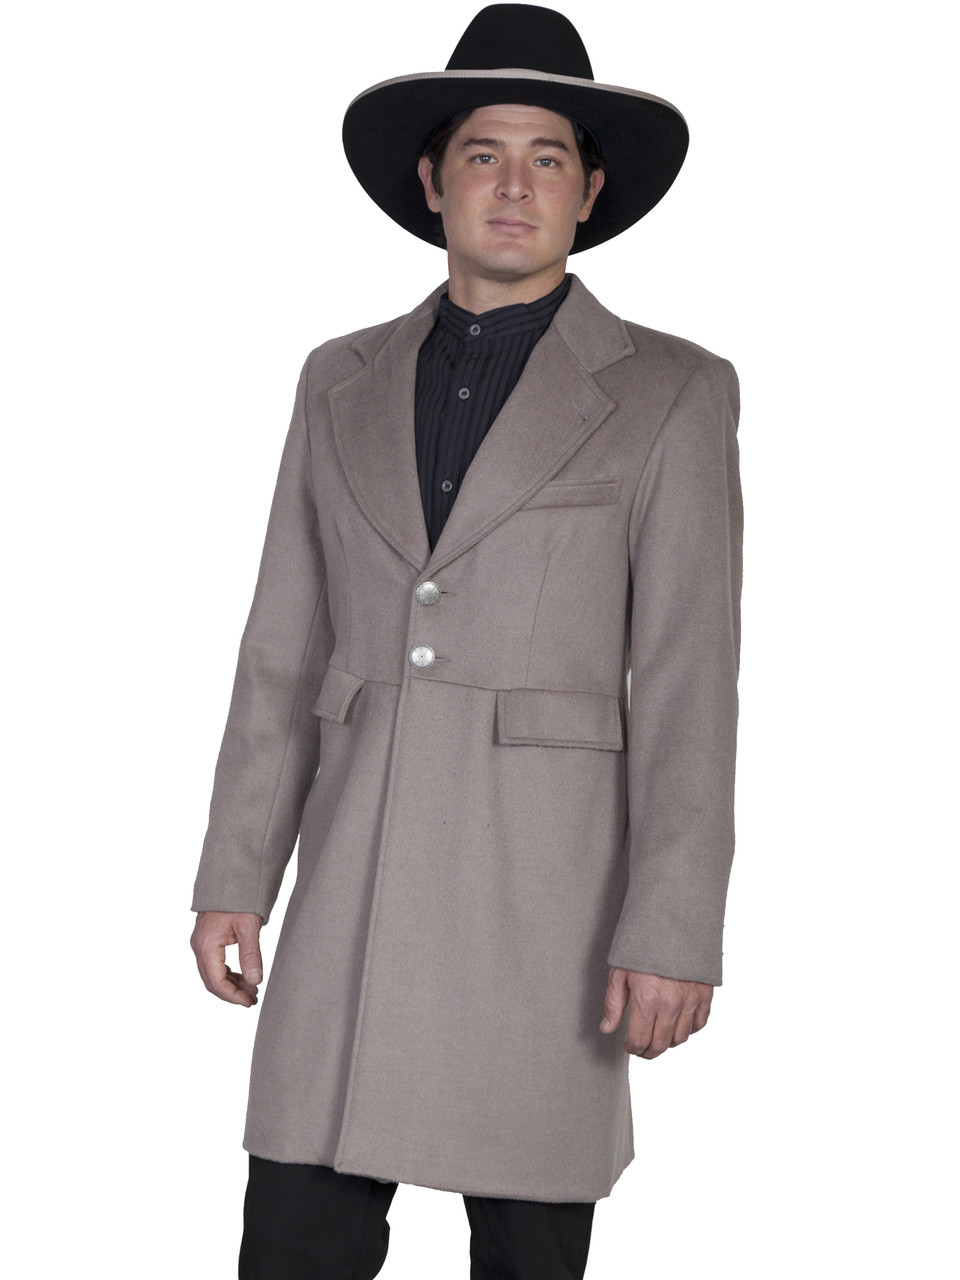 Dove Mens Frock Coat Jacket By Scully Leather